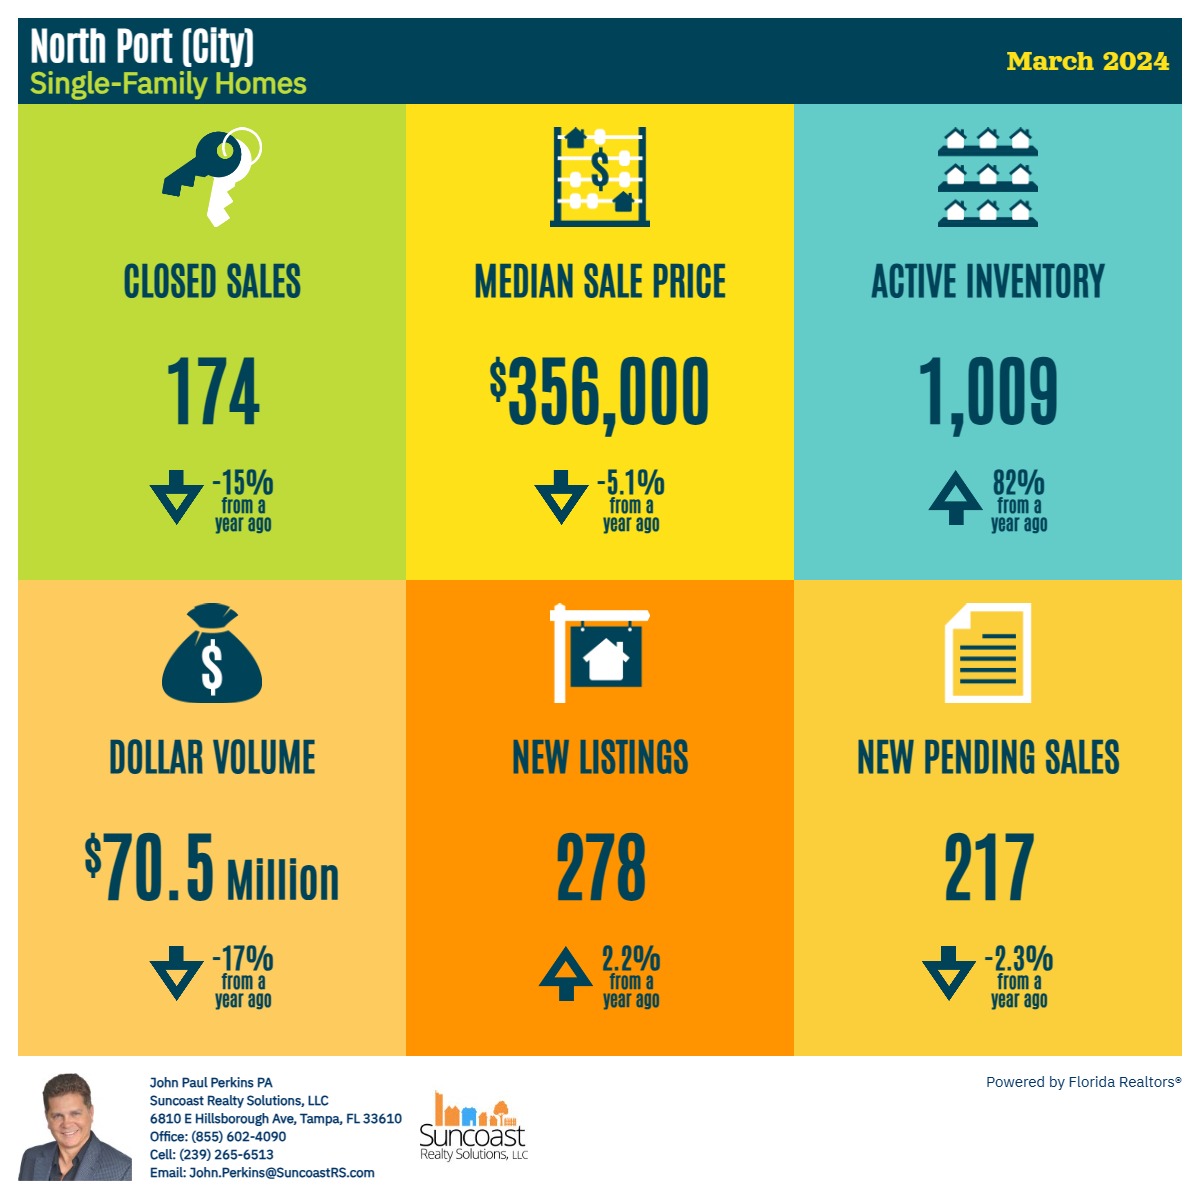 Sales Statistics for Single Family Homes in North Port, FL
Interested in another area? Contact me: 239-265-6513

#johnpaulperkinspa #suncoastrealtysolutions #suncoastrealestate #floridarealtor #northportfl